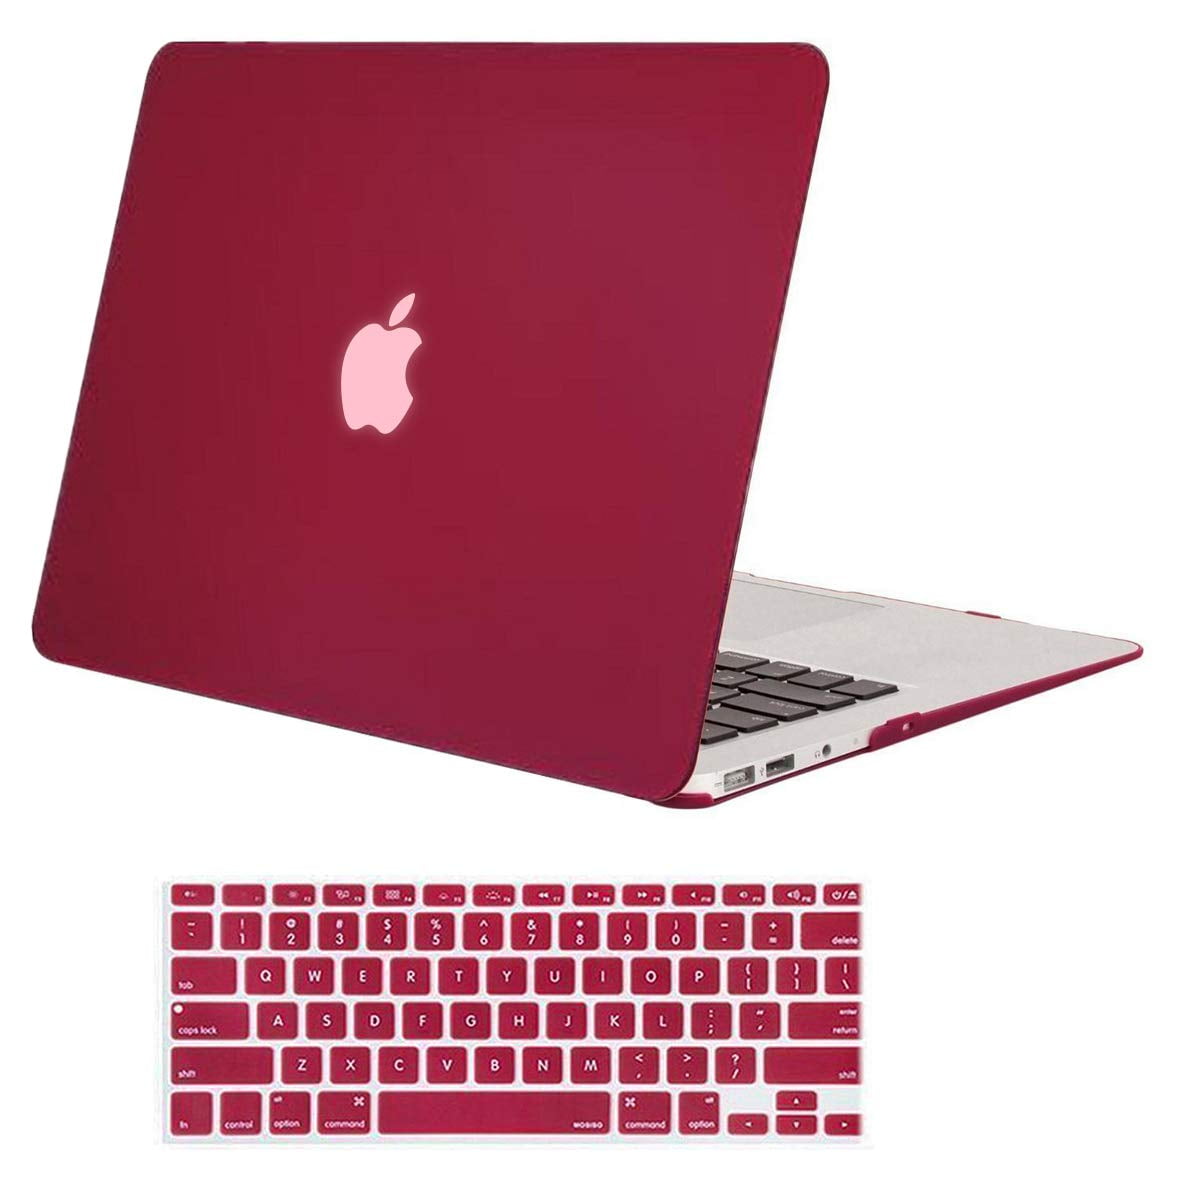 Will NOT fit MacBook Pro Models A1369 / A1466 13 Love My Case / BUNDLE RED Hard Shell Case with matching KEYBOARD Skin and NEOPRENE Sleeve Cover for Apple MacBook Air 13 inch